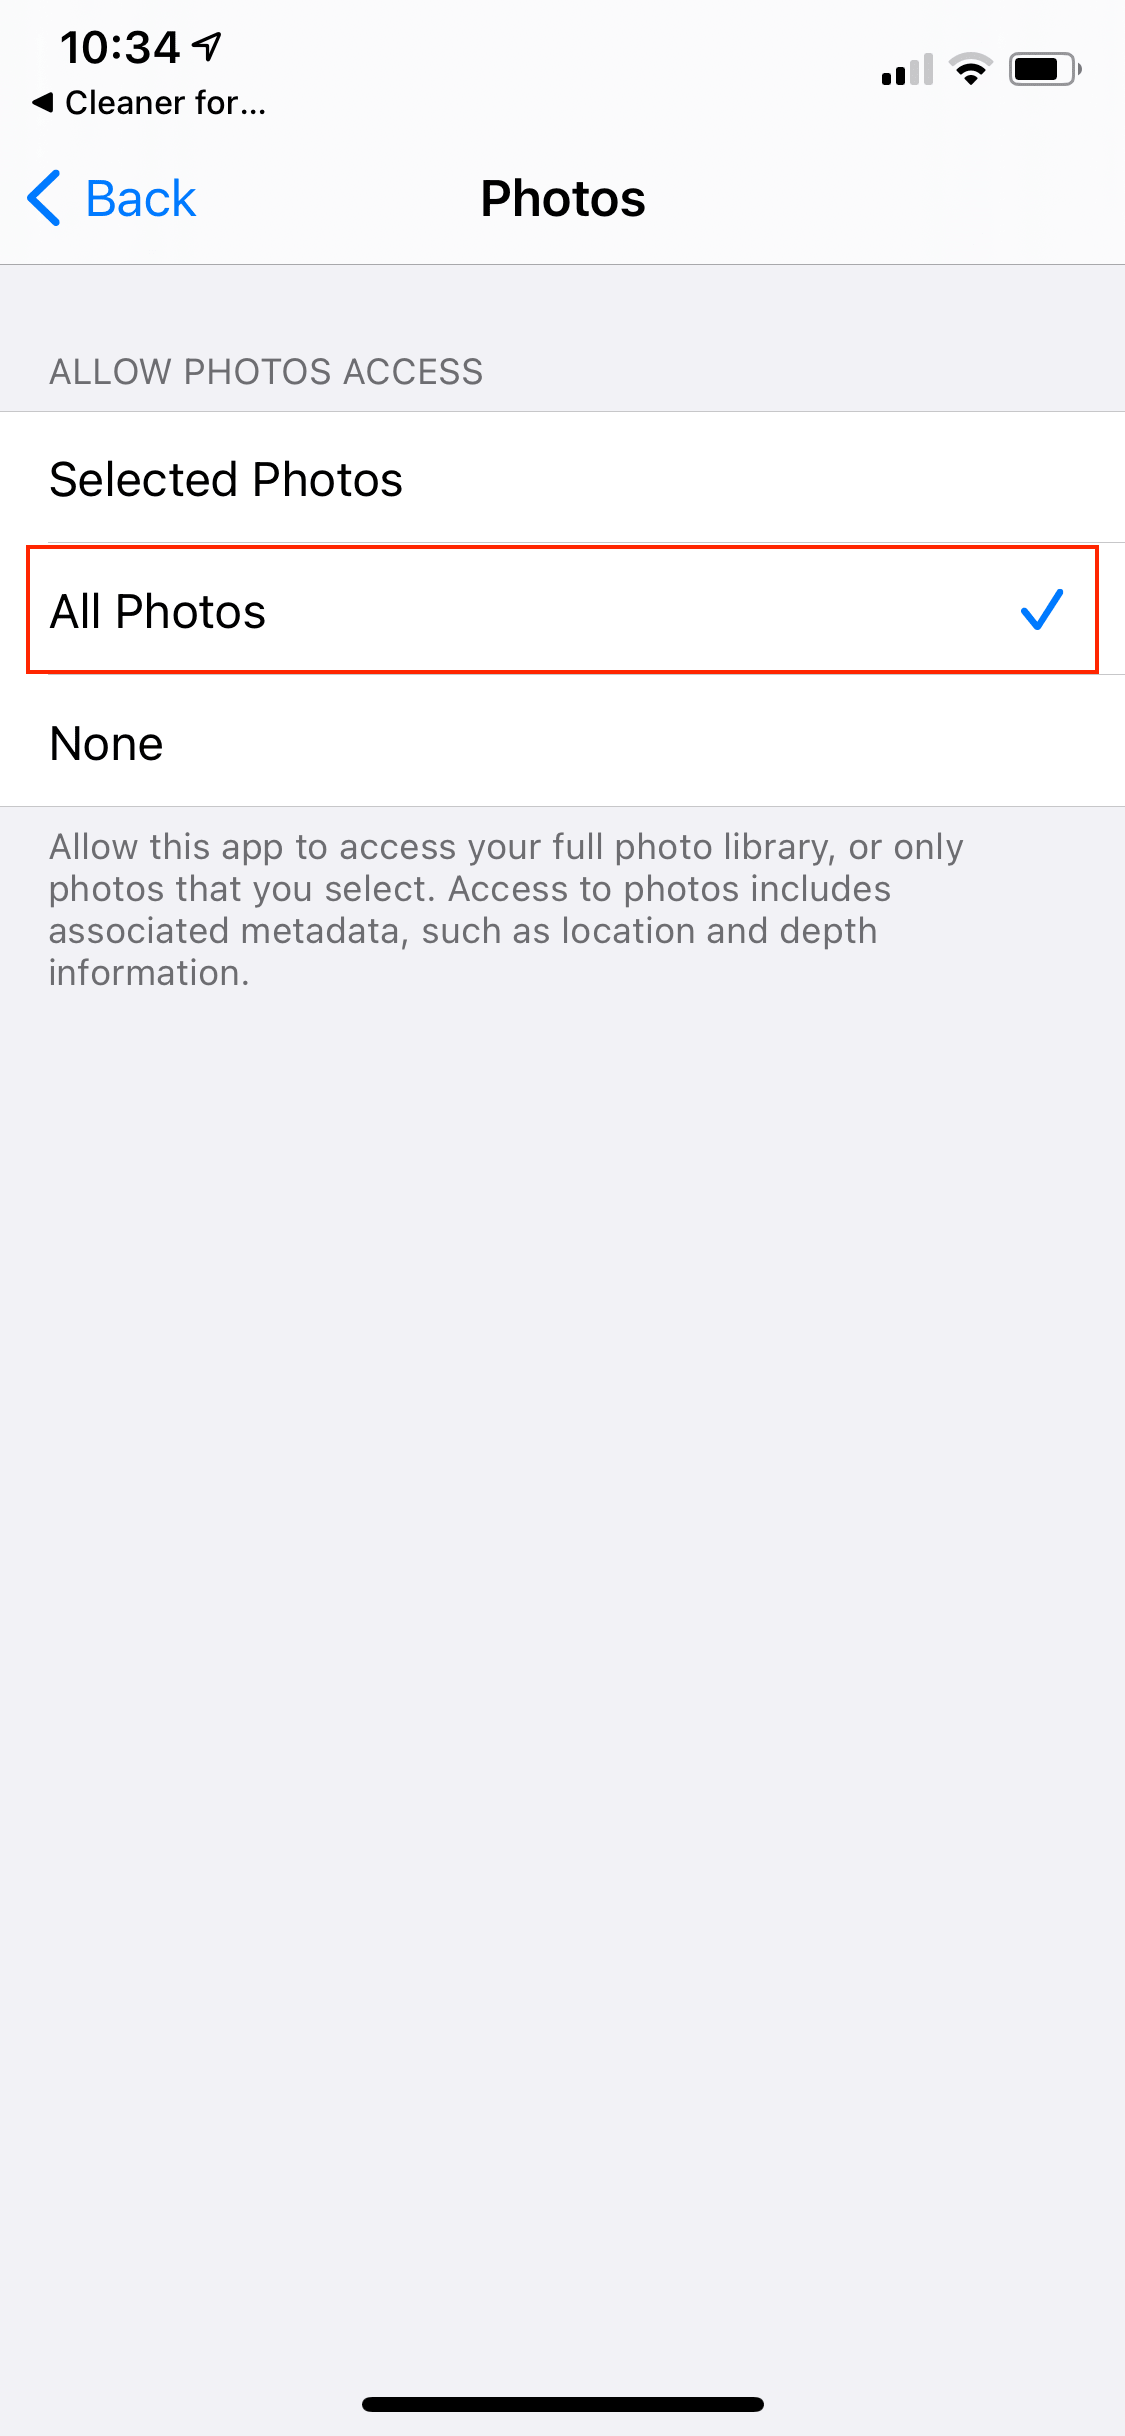 phone cleaner access all photos